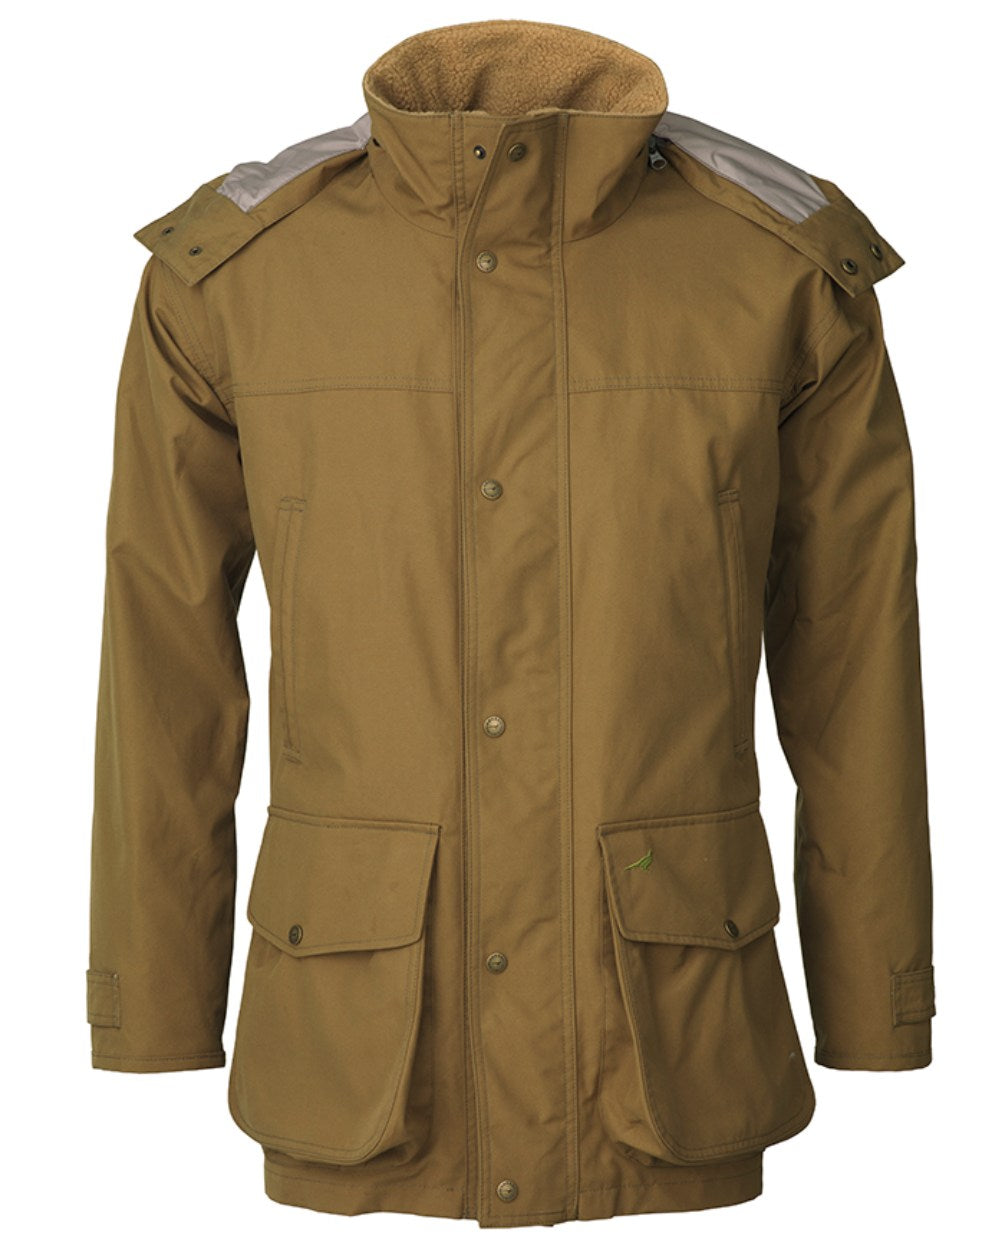 Bronze Coloured Laksen Merlin Ventile Shooting Coat On A White Background 